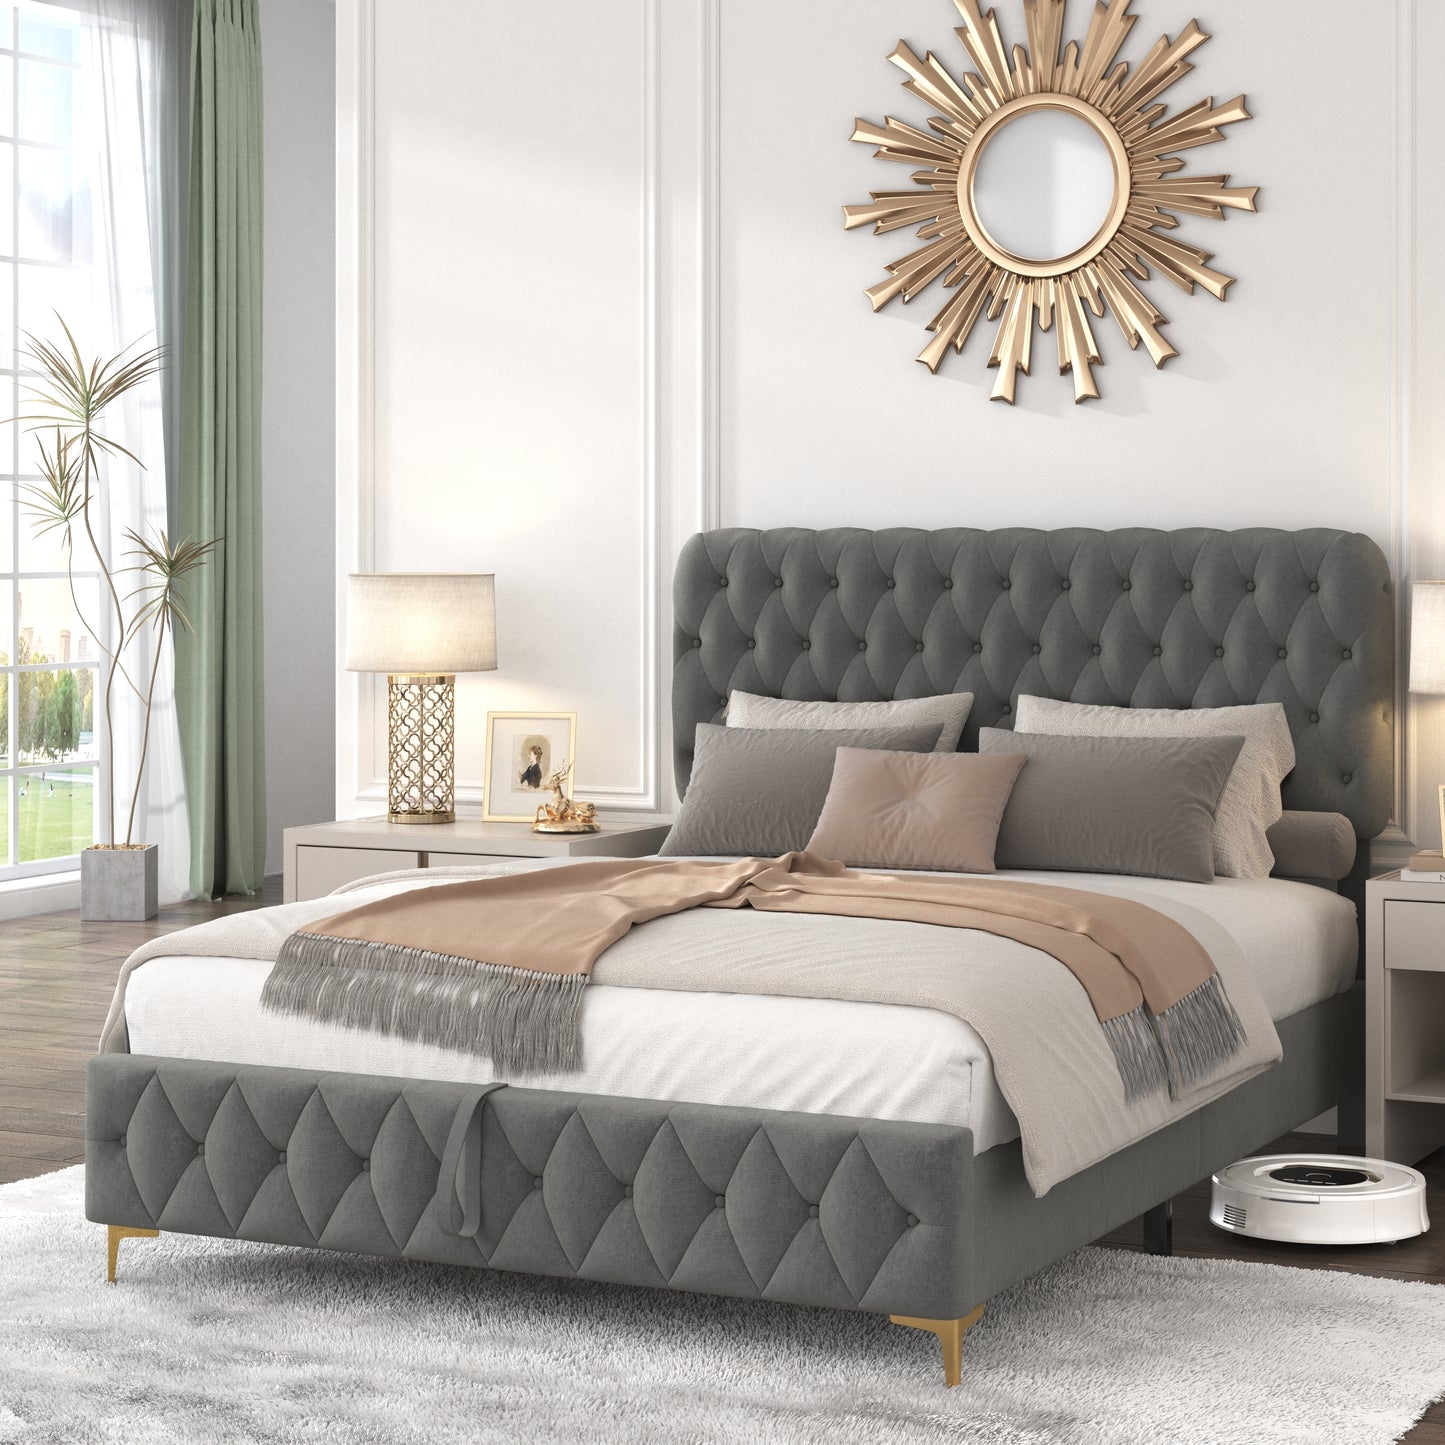 Queen Platform Bed Frame With pneumatic hydraulic function, Velvet Upholstered Bed with Deep Tufted Buttons, Lift up storage bed With Hidden Underbed Oversized Storage, Gray